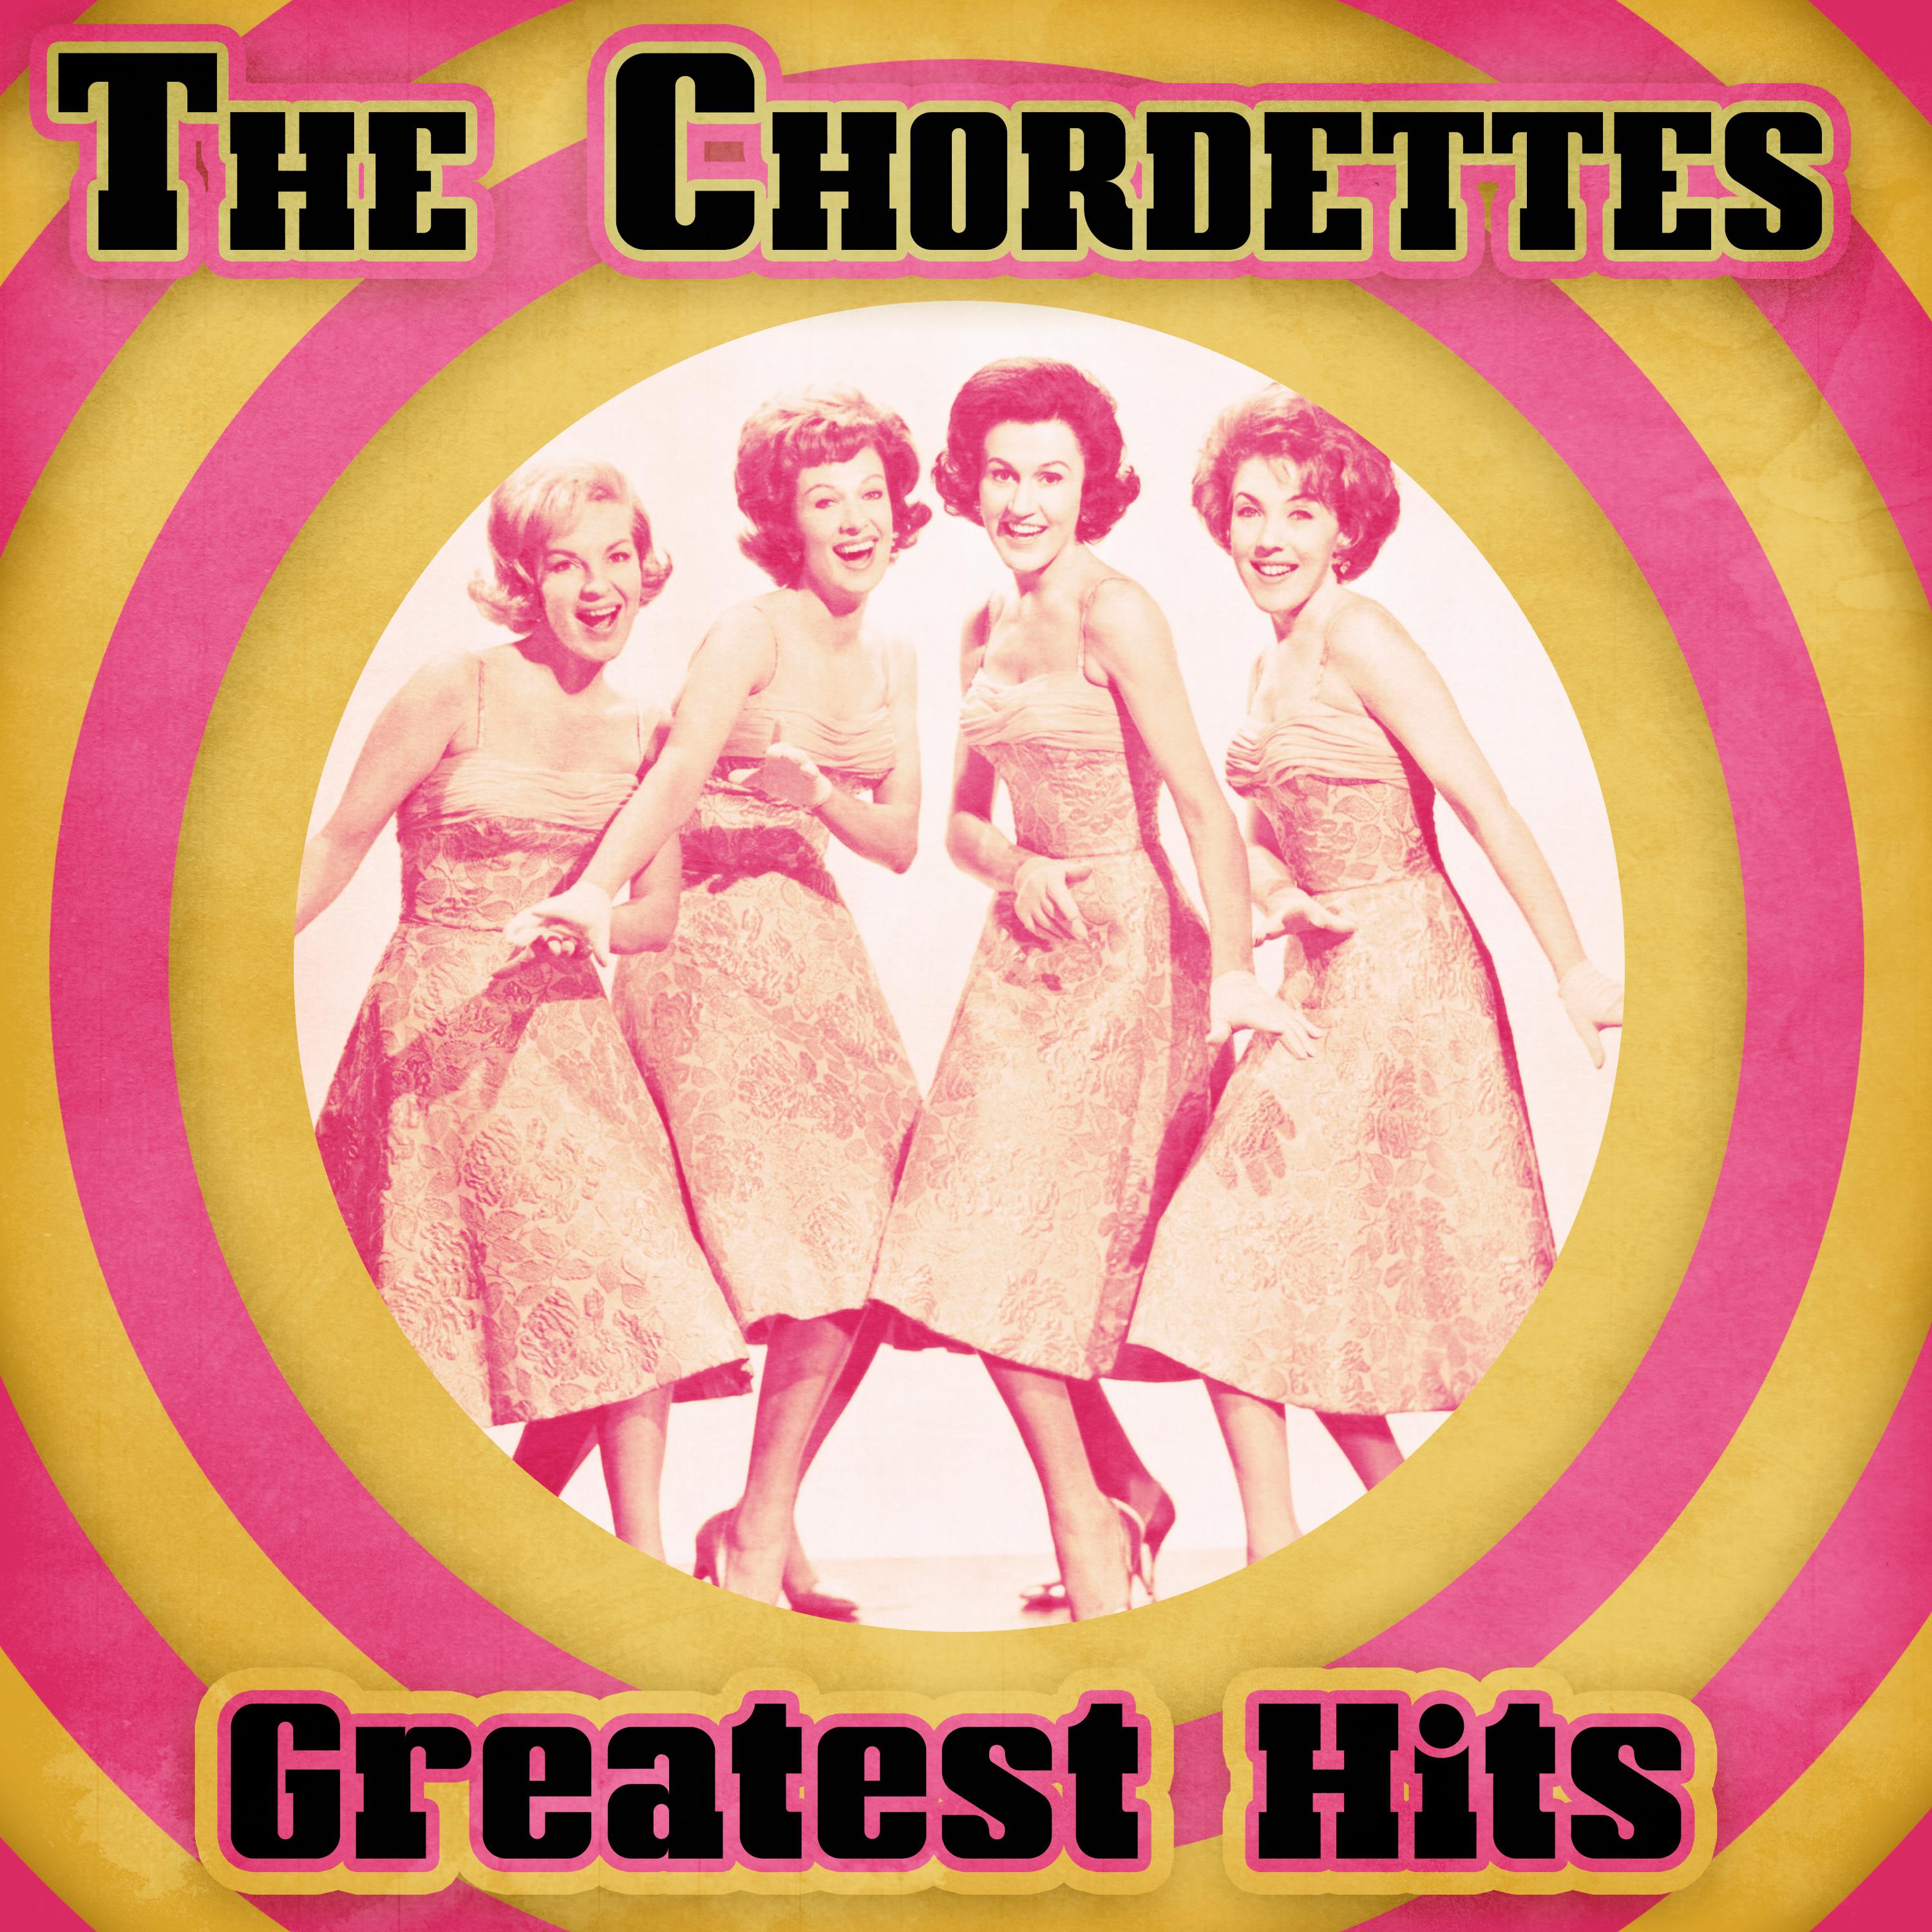 The Chordettes - Charlie Brown (Remastered)